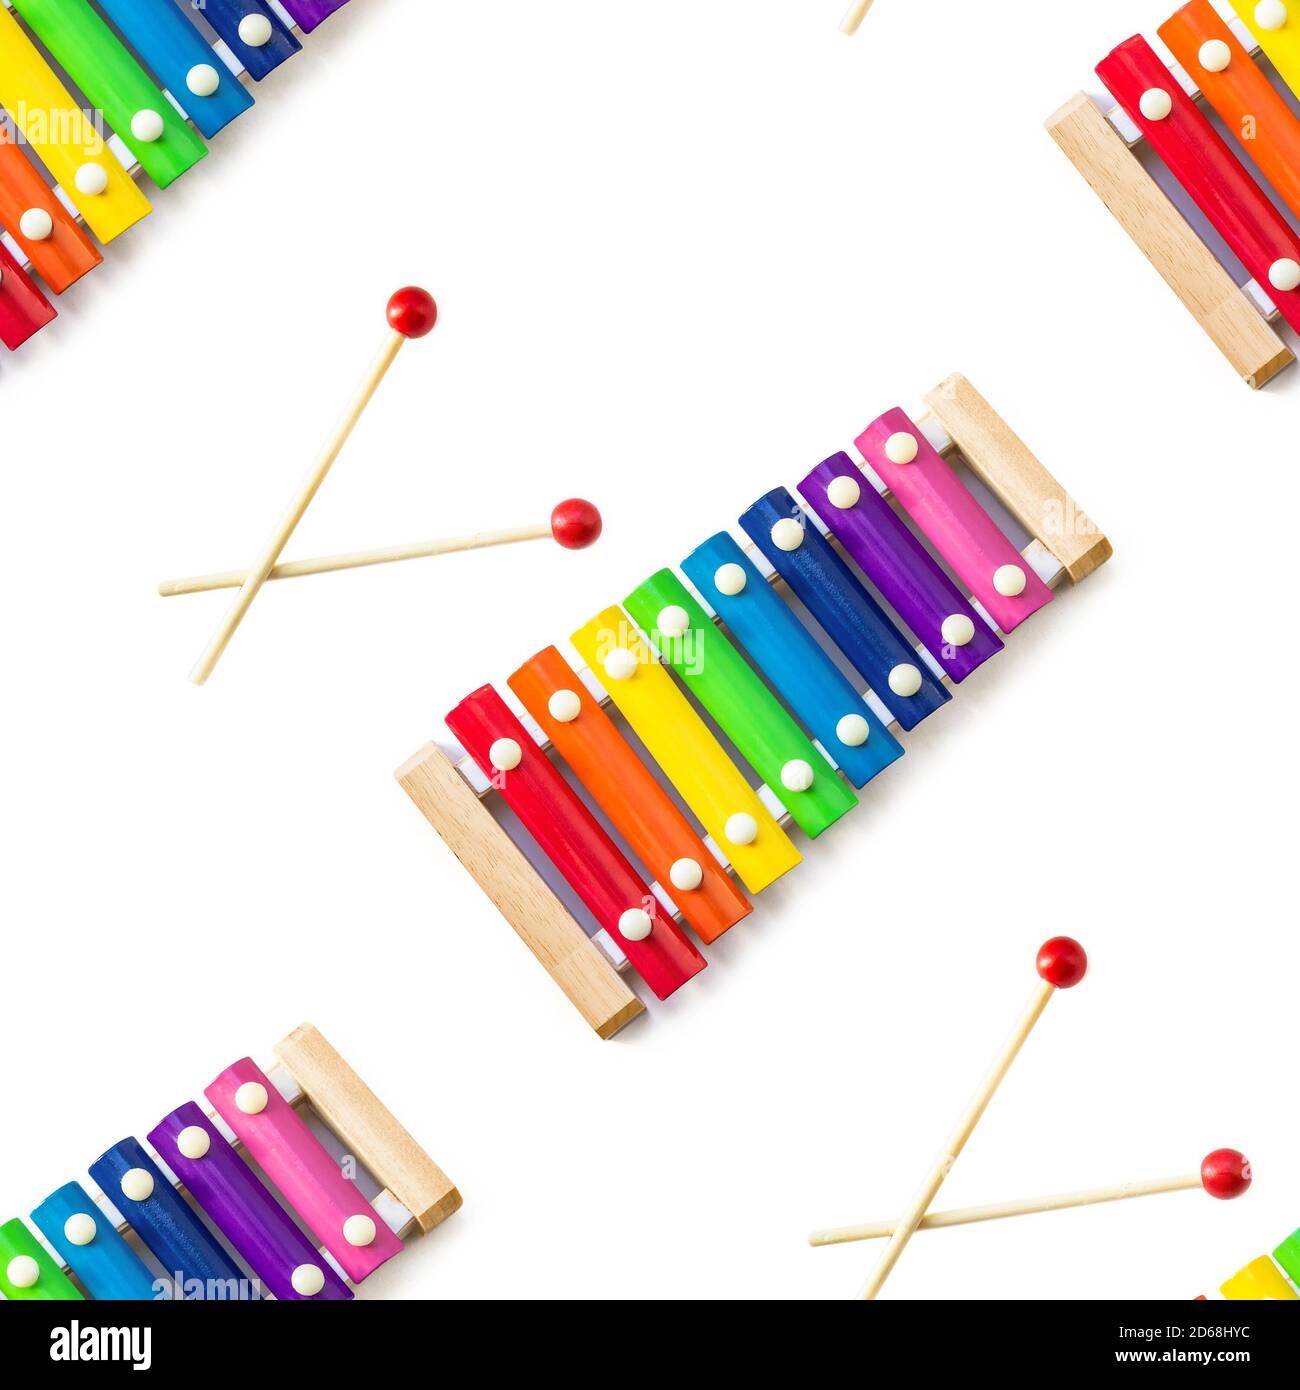 Seamless pattern of Rainbow Colored Wooden Toy 8 tone Xylophone glockenspiel isolated on white background with clipping path. toy glockenspiel made of Stock Photo